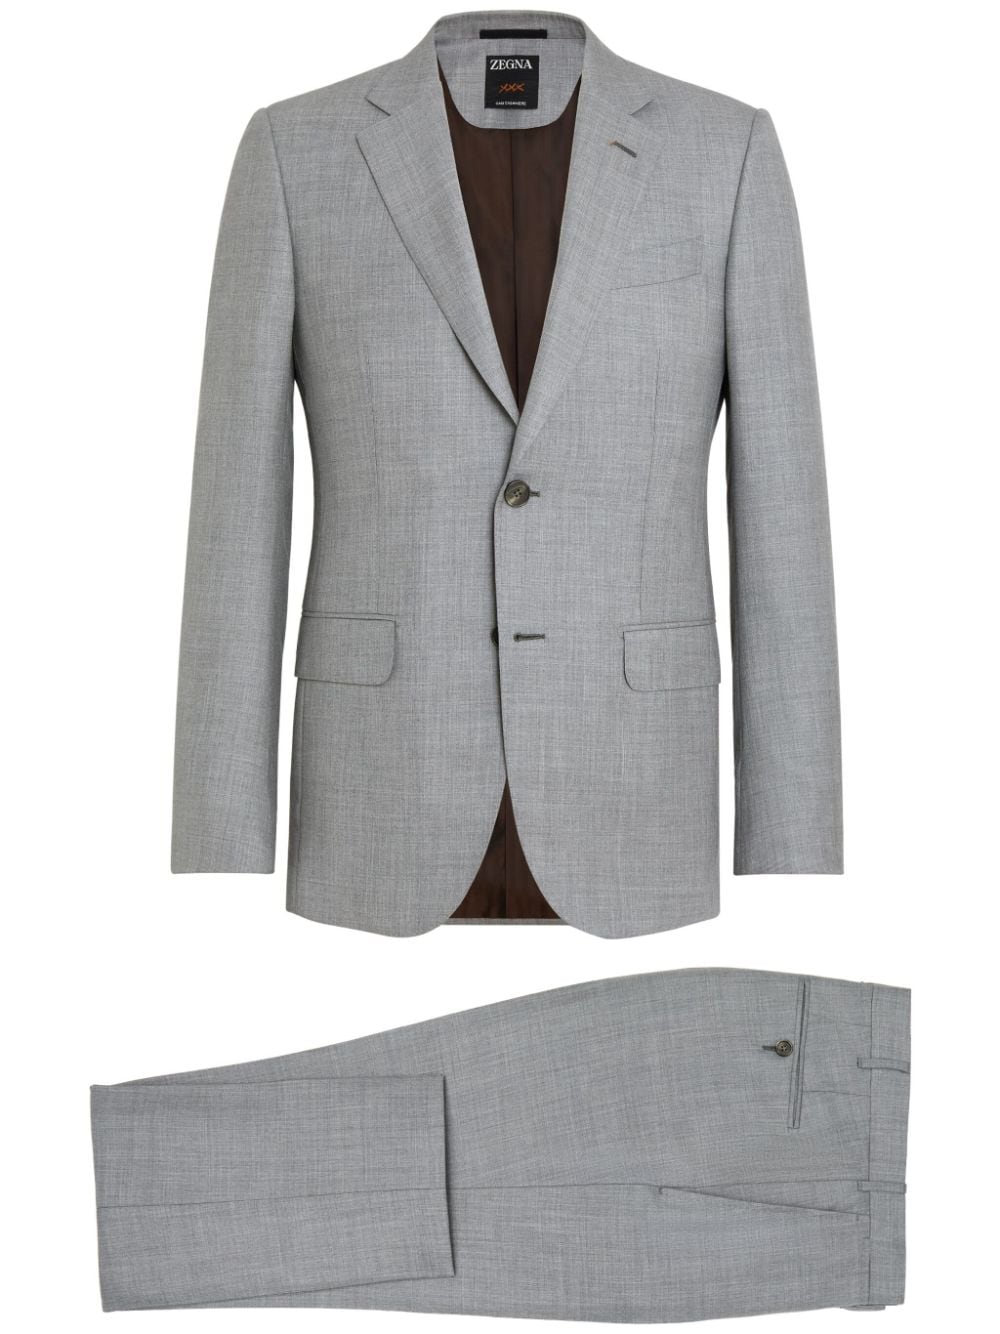 ZEGNA OASI SINGLE-BREASTED CASHMERE SUIT